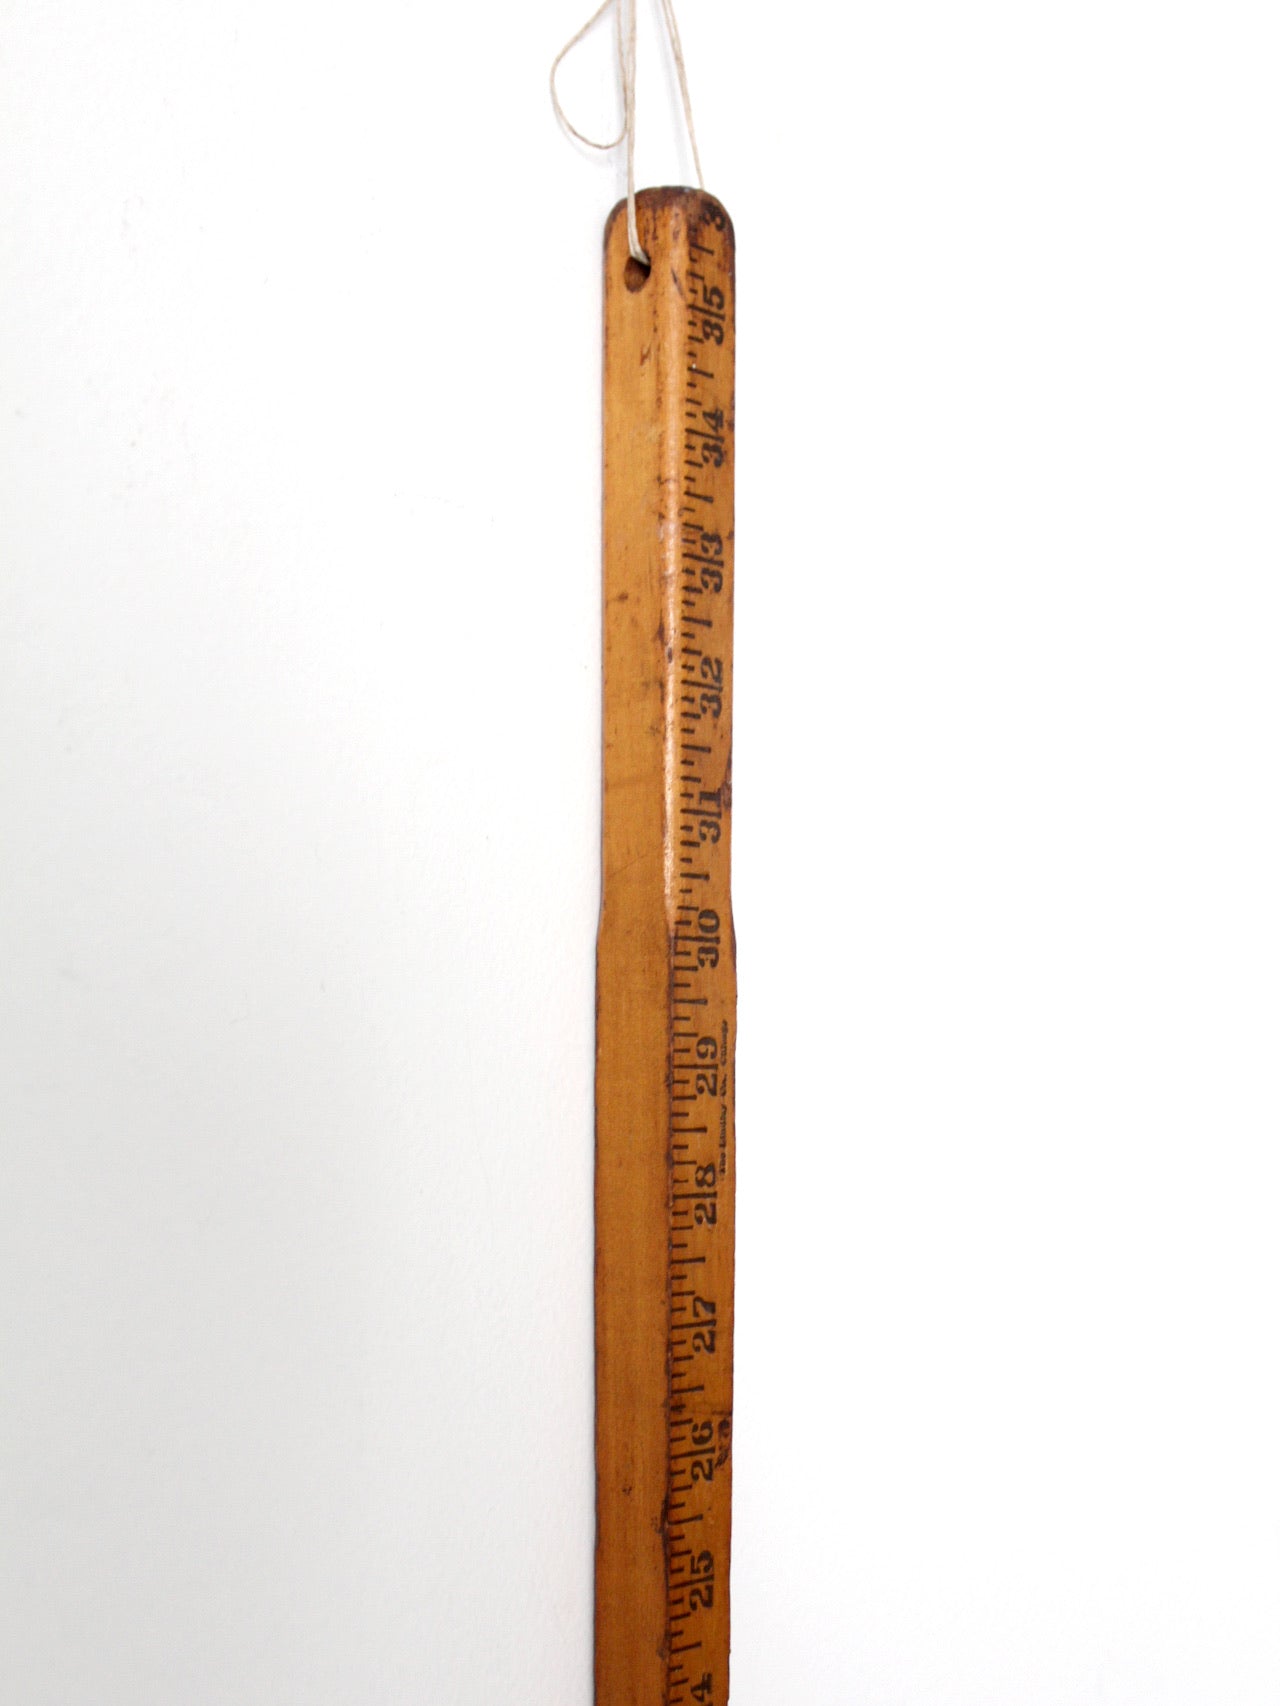 91cm Walking Yard Stick 36 Inches Woodworking Ruler Carpenter Yardstick -  China Yardstick, Wood Yardstick